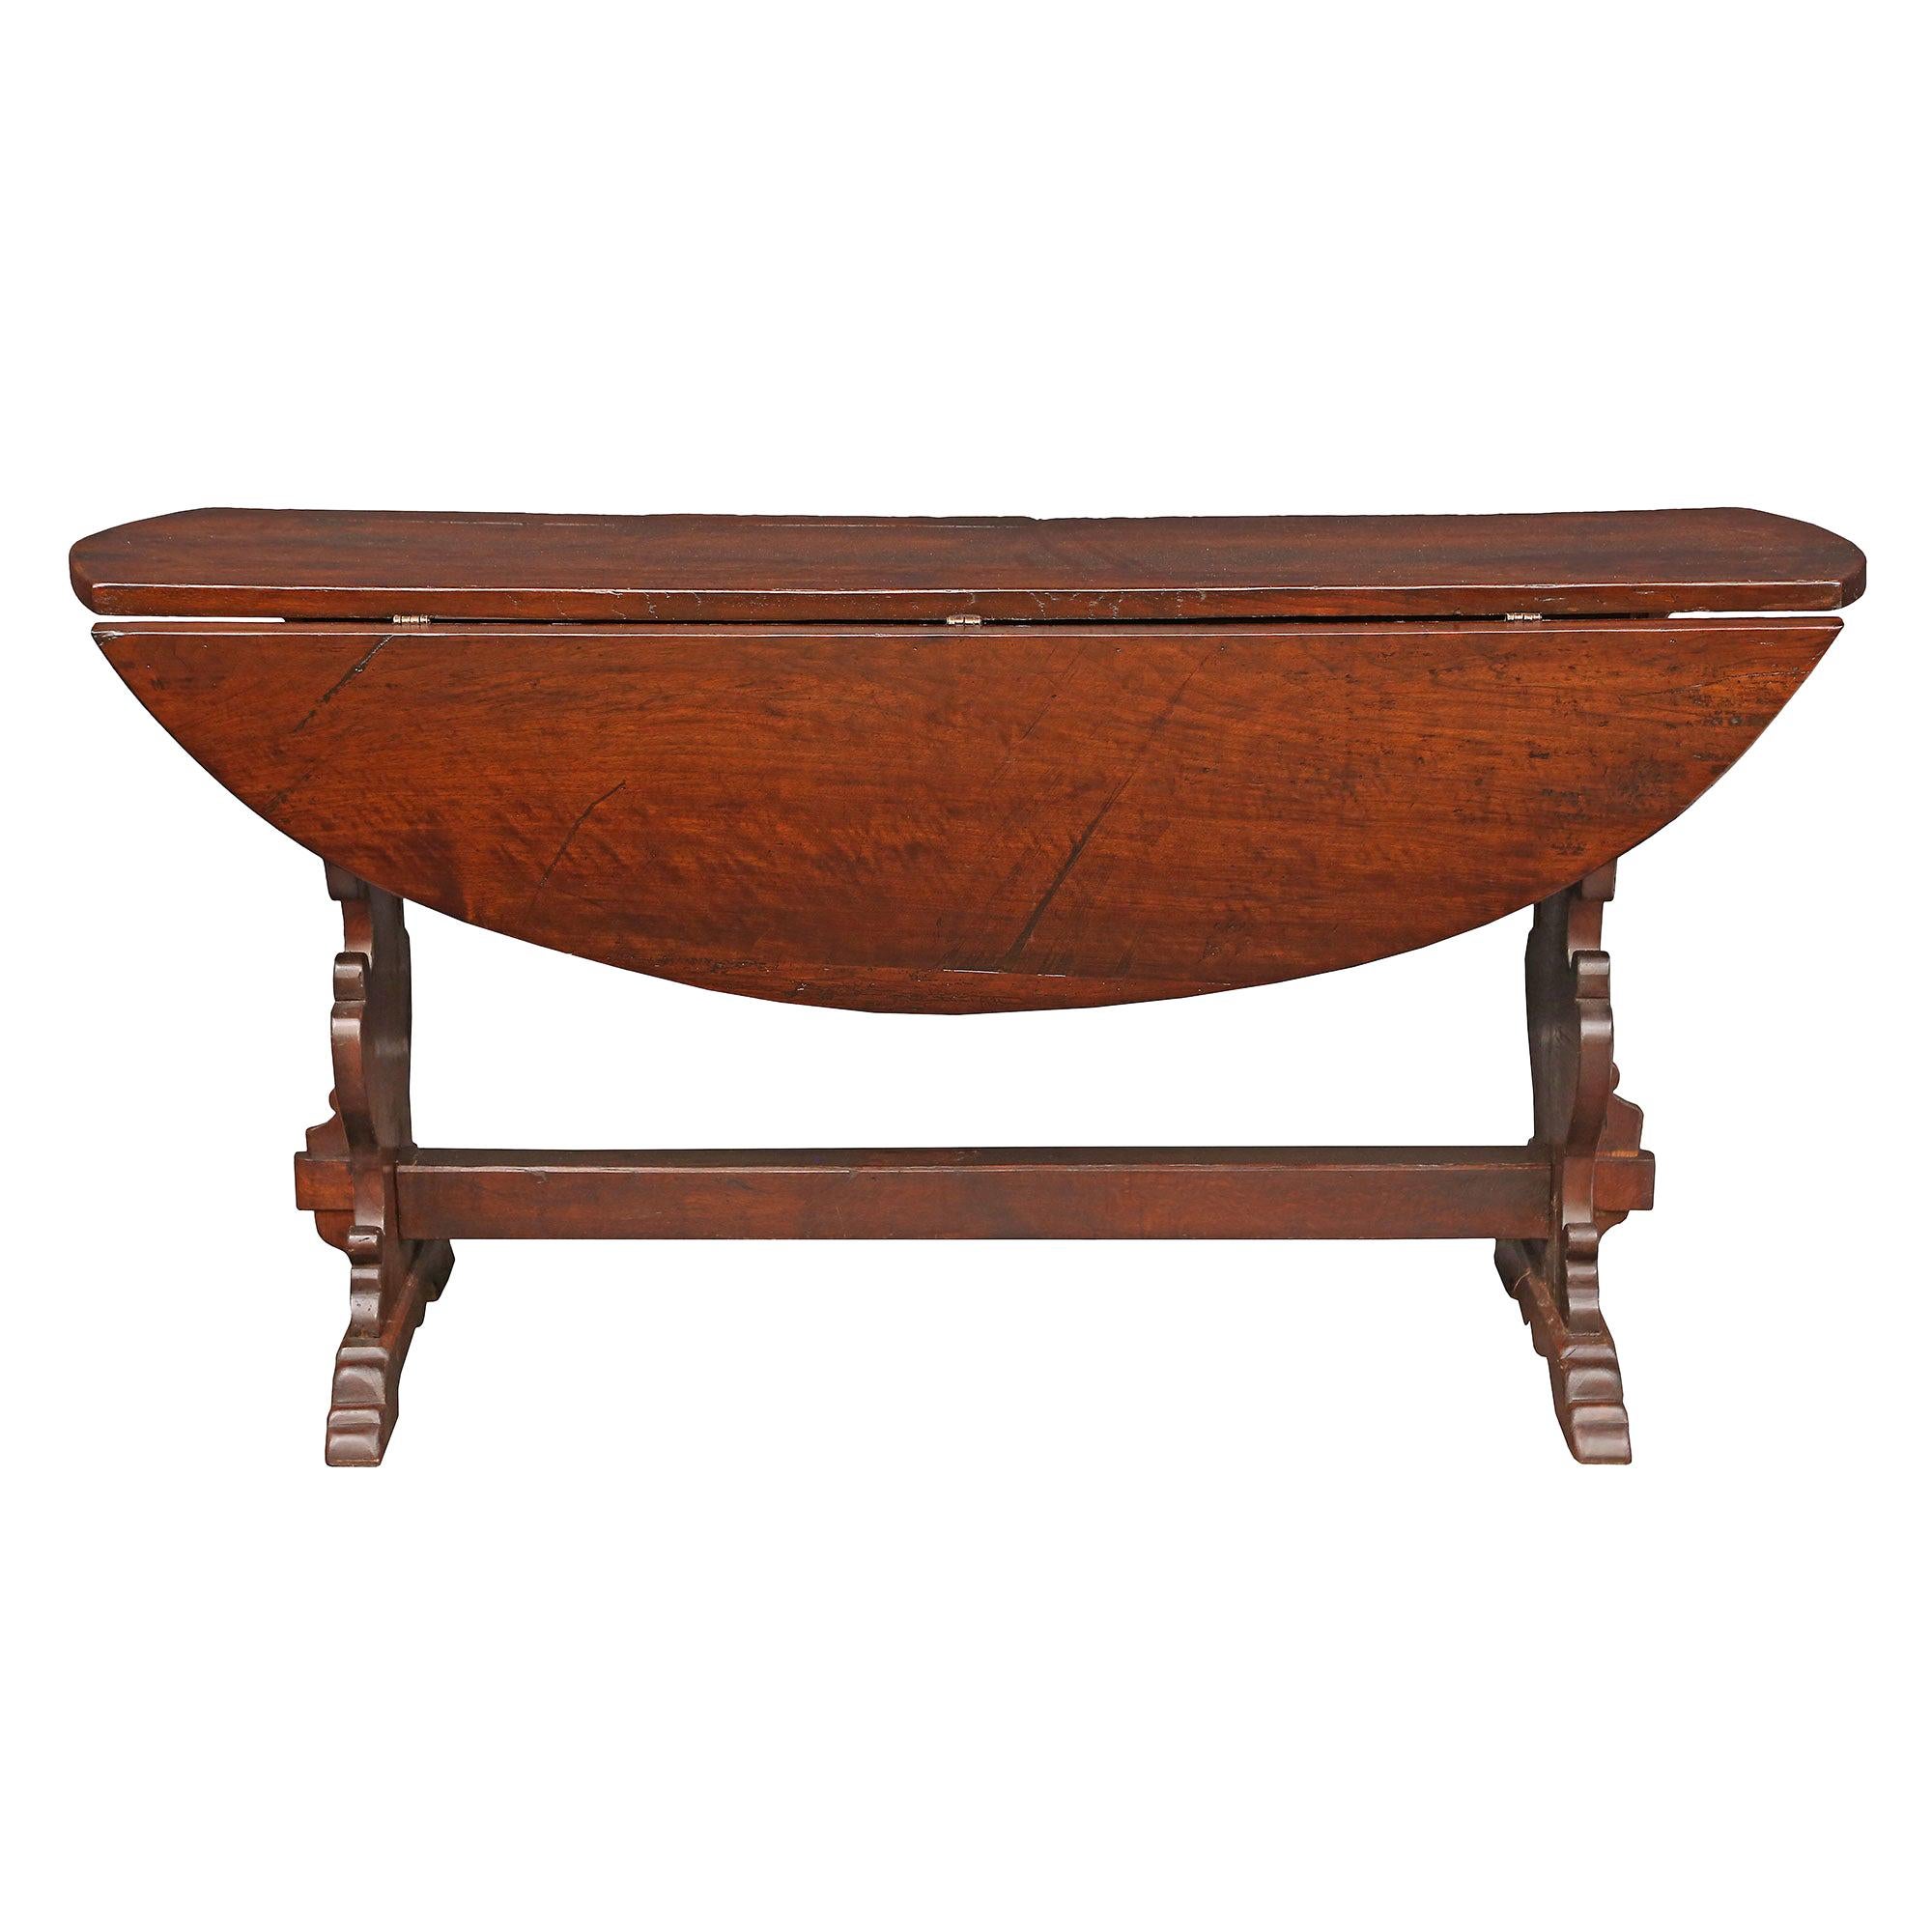 Italian 18th Century Solid Walnut Gateleg Table from Tuscany For Sale